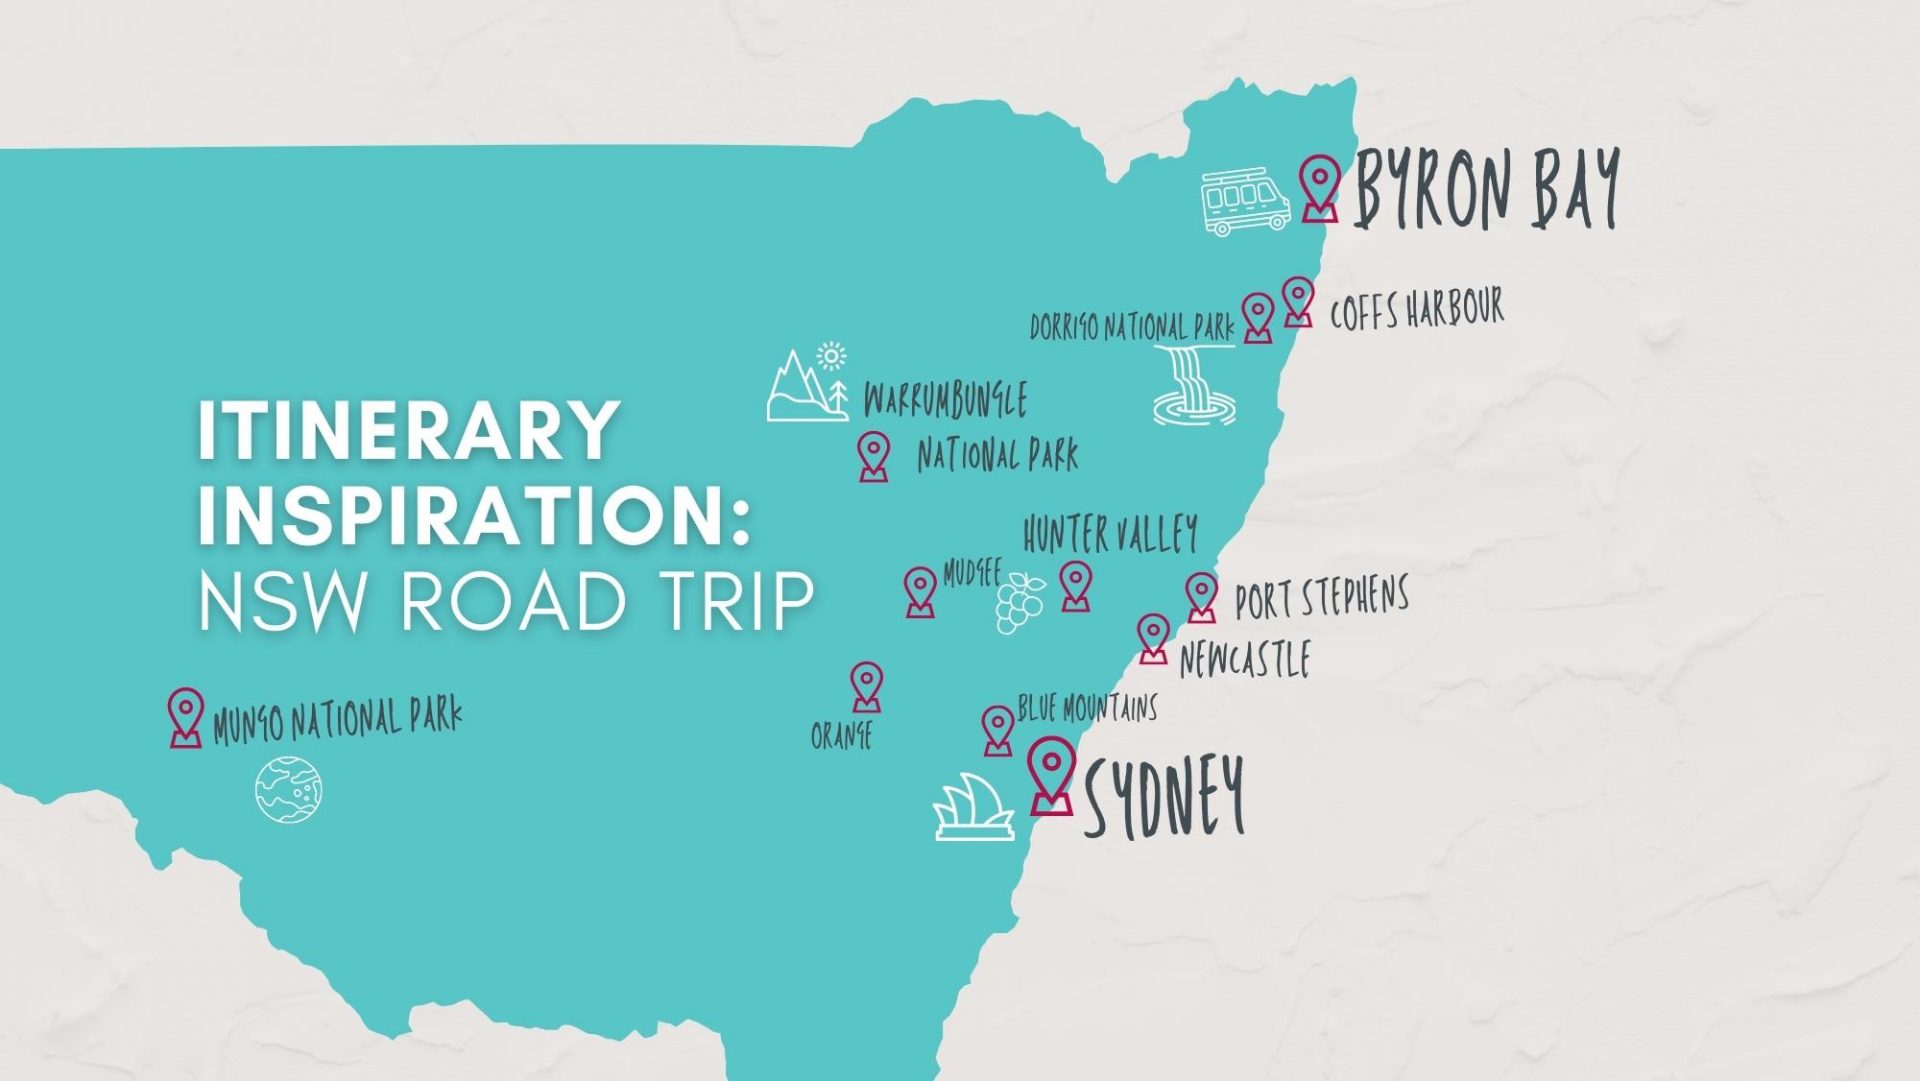 Take the road less travelled with this self-drive NSW road trip itinerary